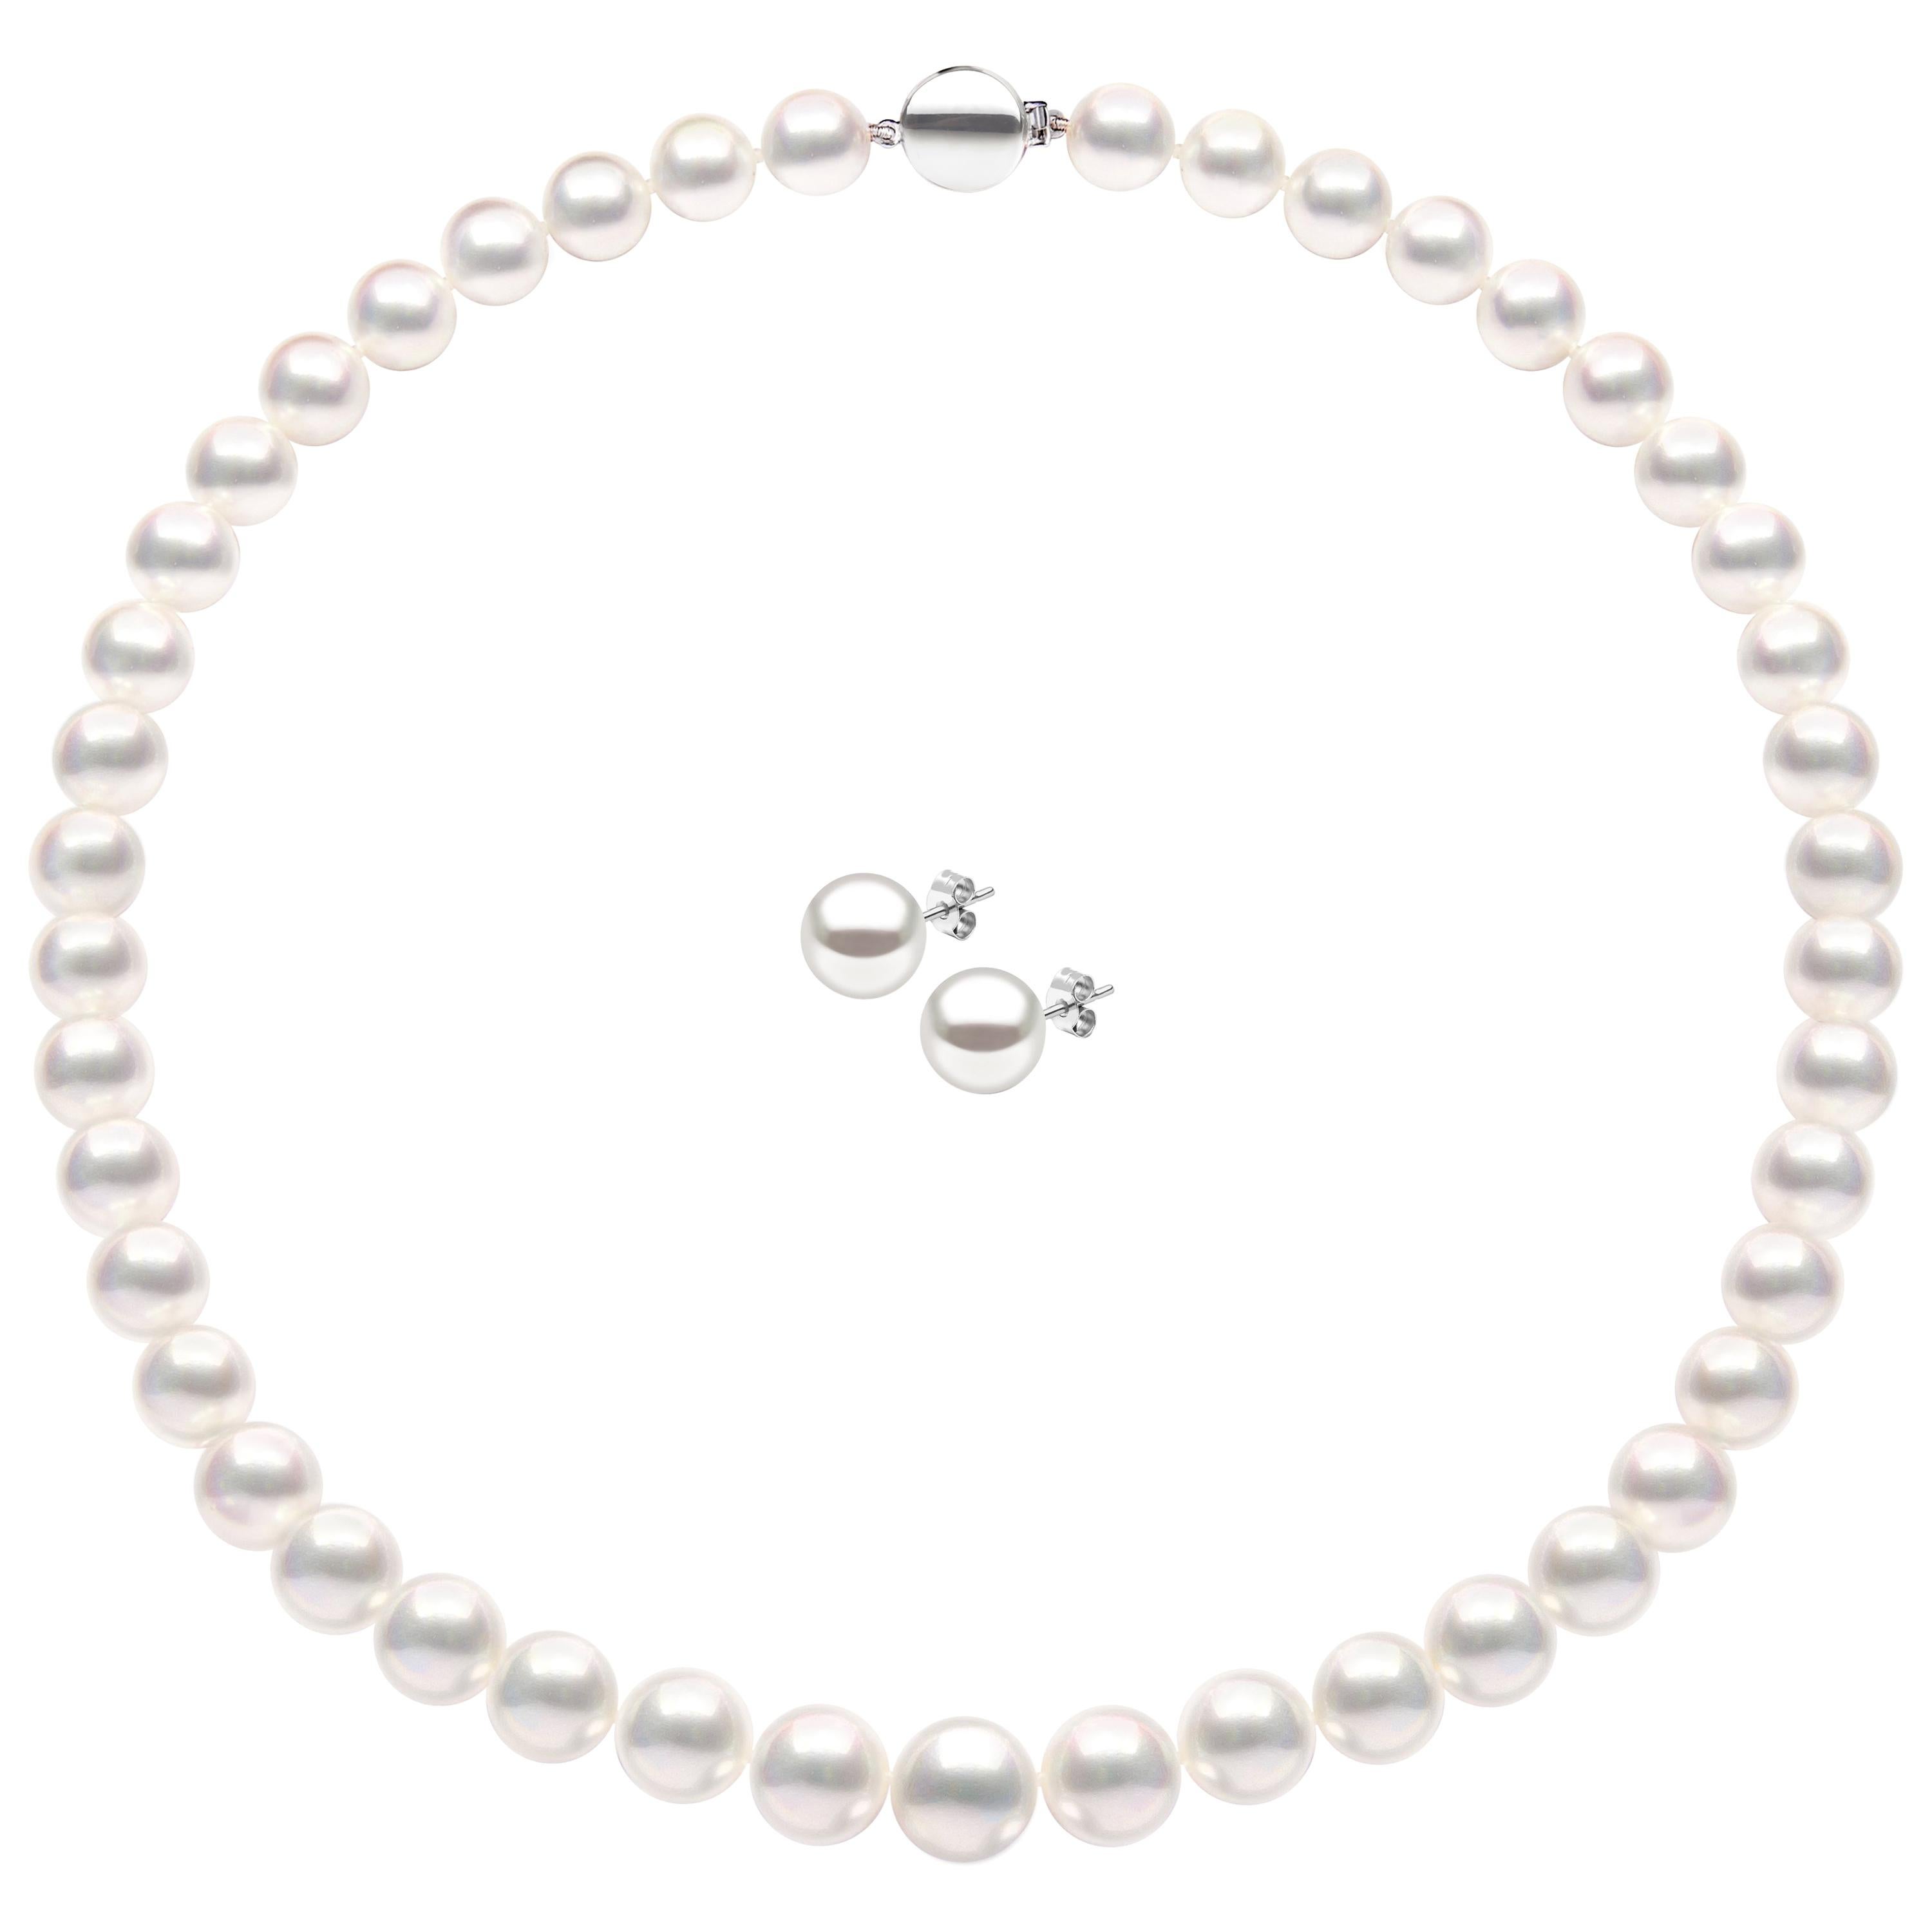 Yoko London South Sea Pearl Necklace and Earring Set, in 18 Karat White Gold